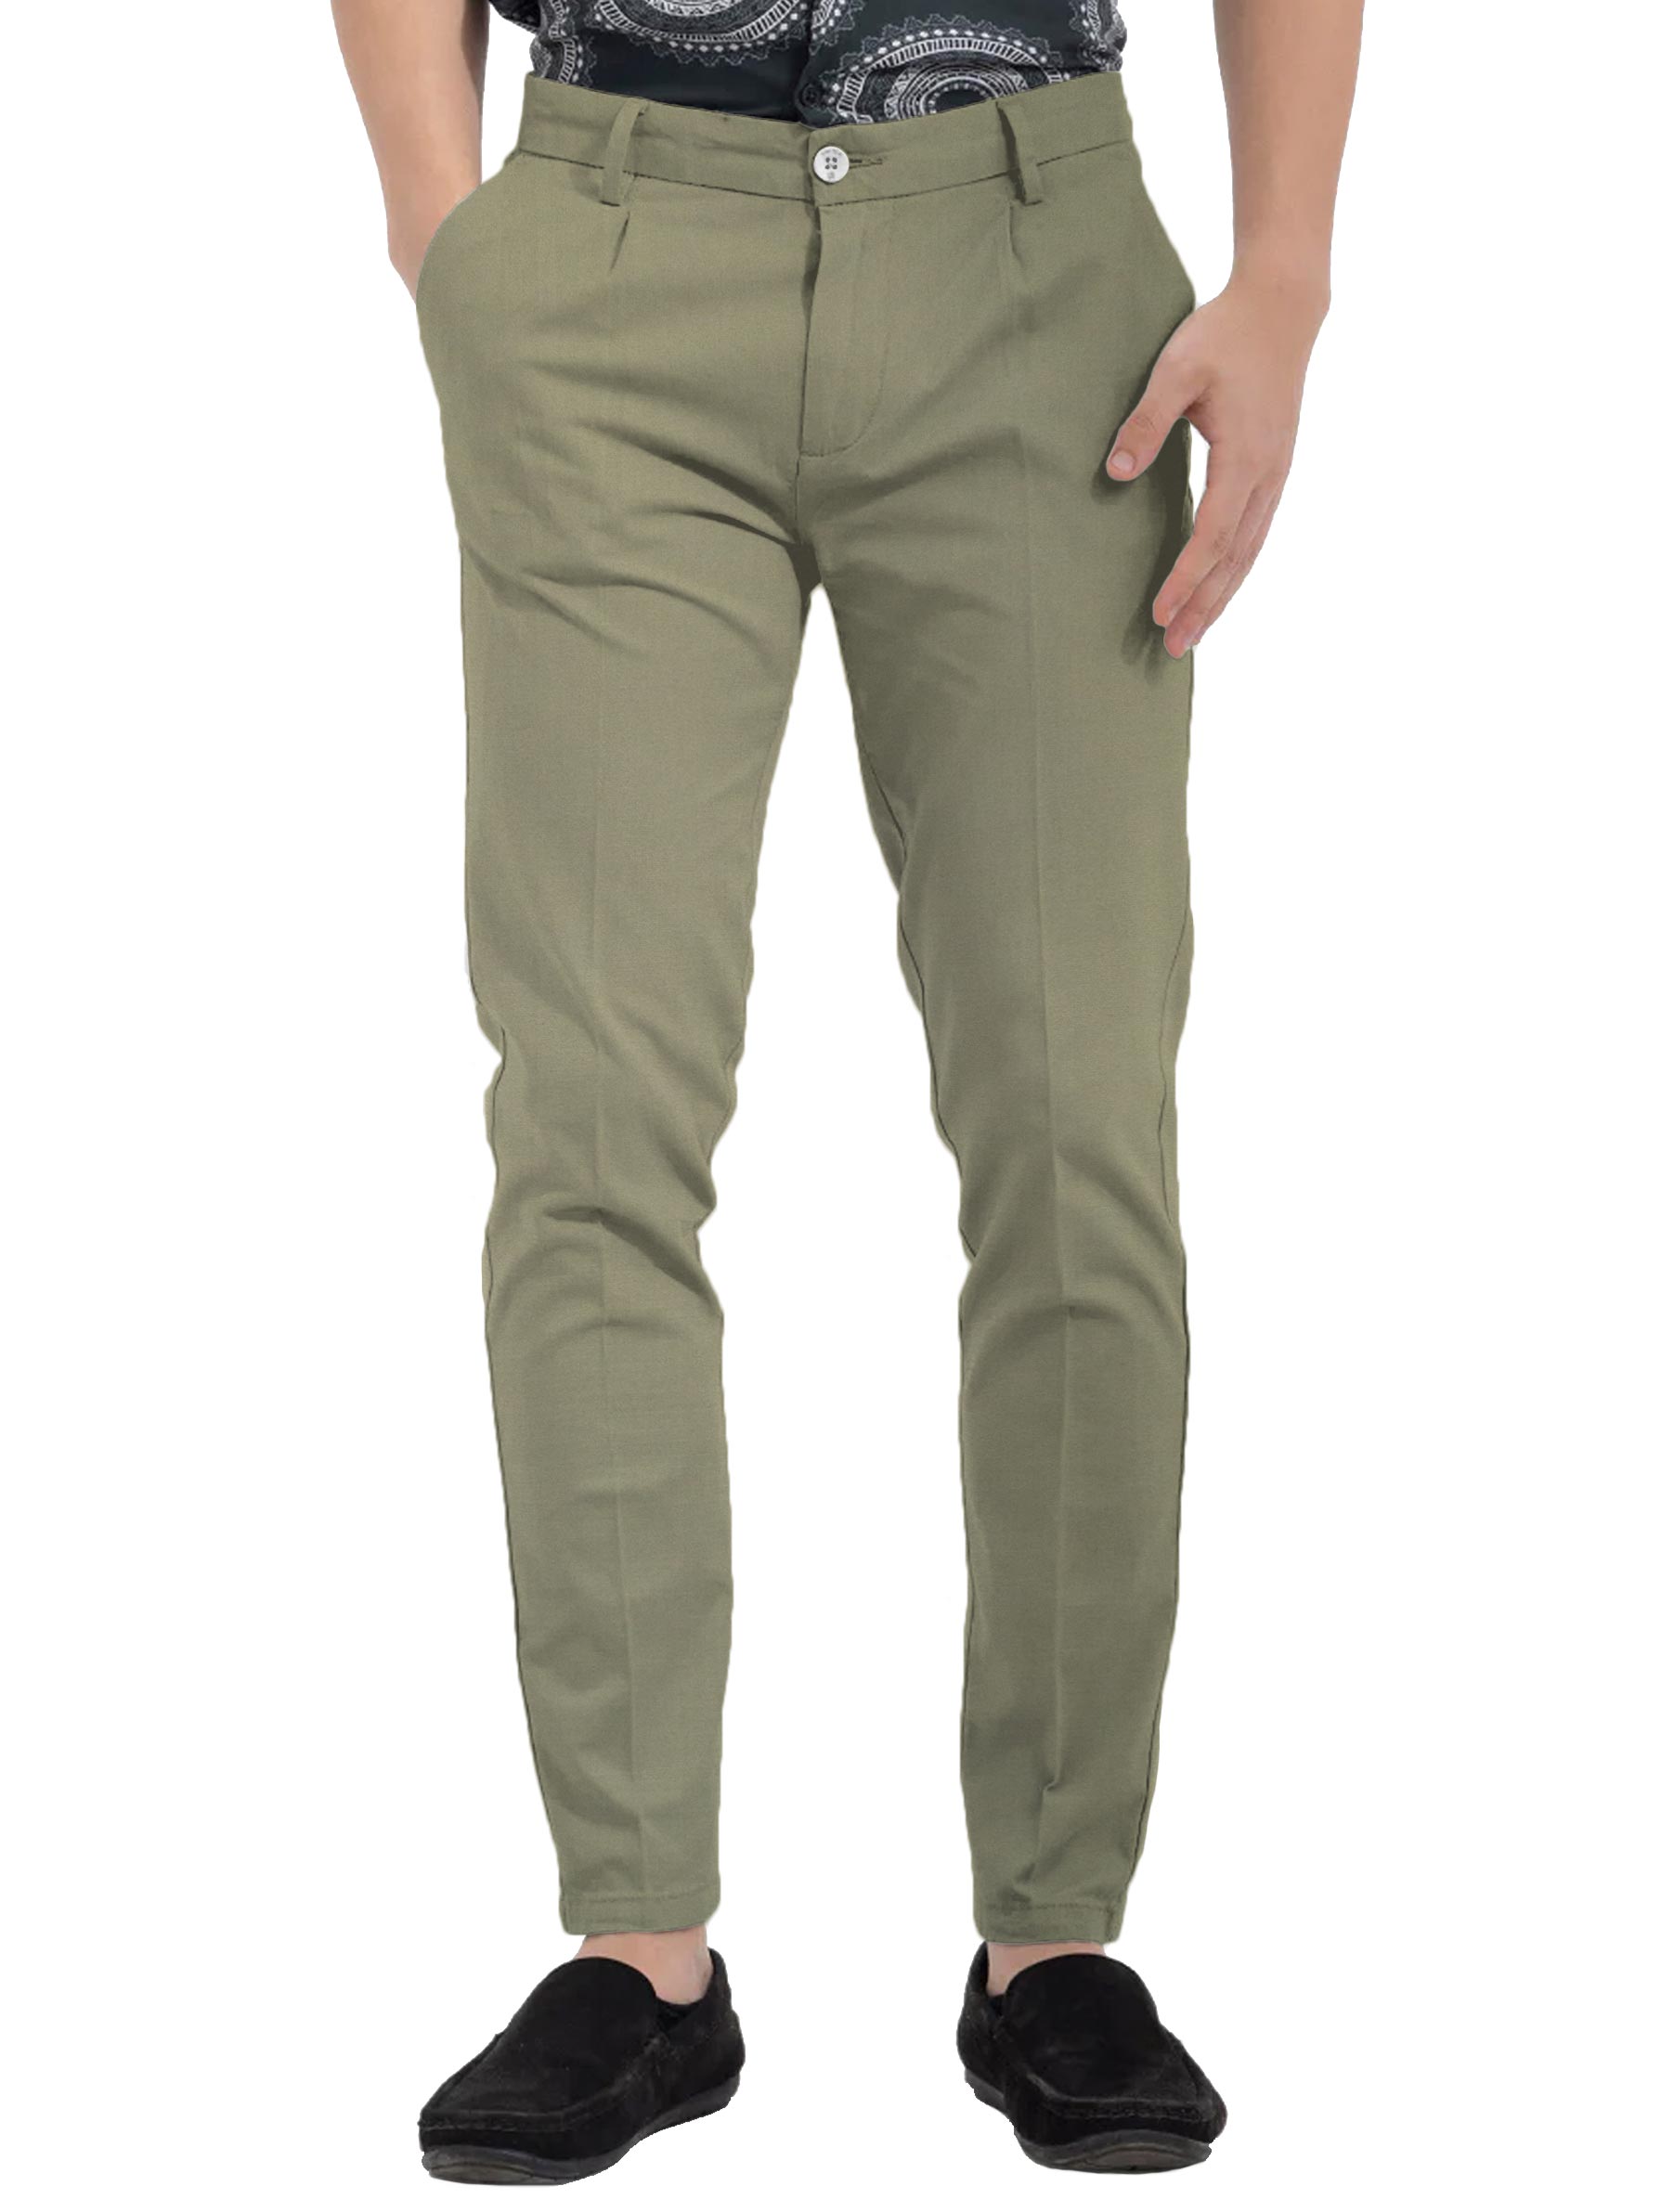 Buy Triber Regular Fit Cotton Casual Trouser | 100% Pure Cotton Trouser |  10 Solid Colors Available | Fully Lycra-Stretchable | Suitable in Everyday  Wear (Camel, 28) at Amazon.in